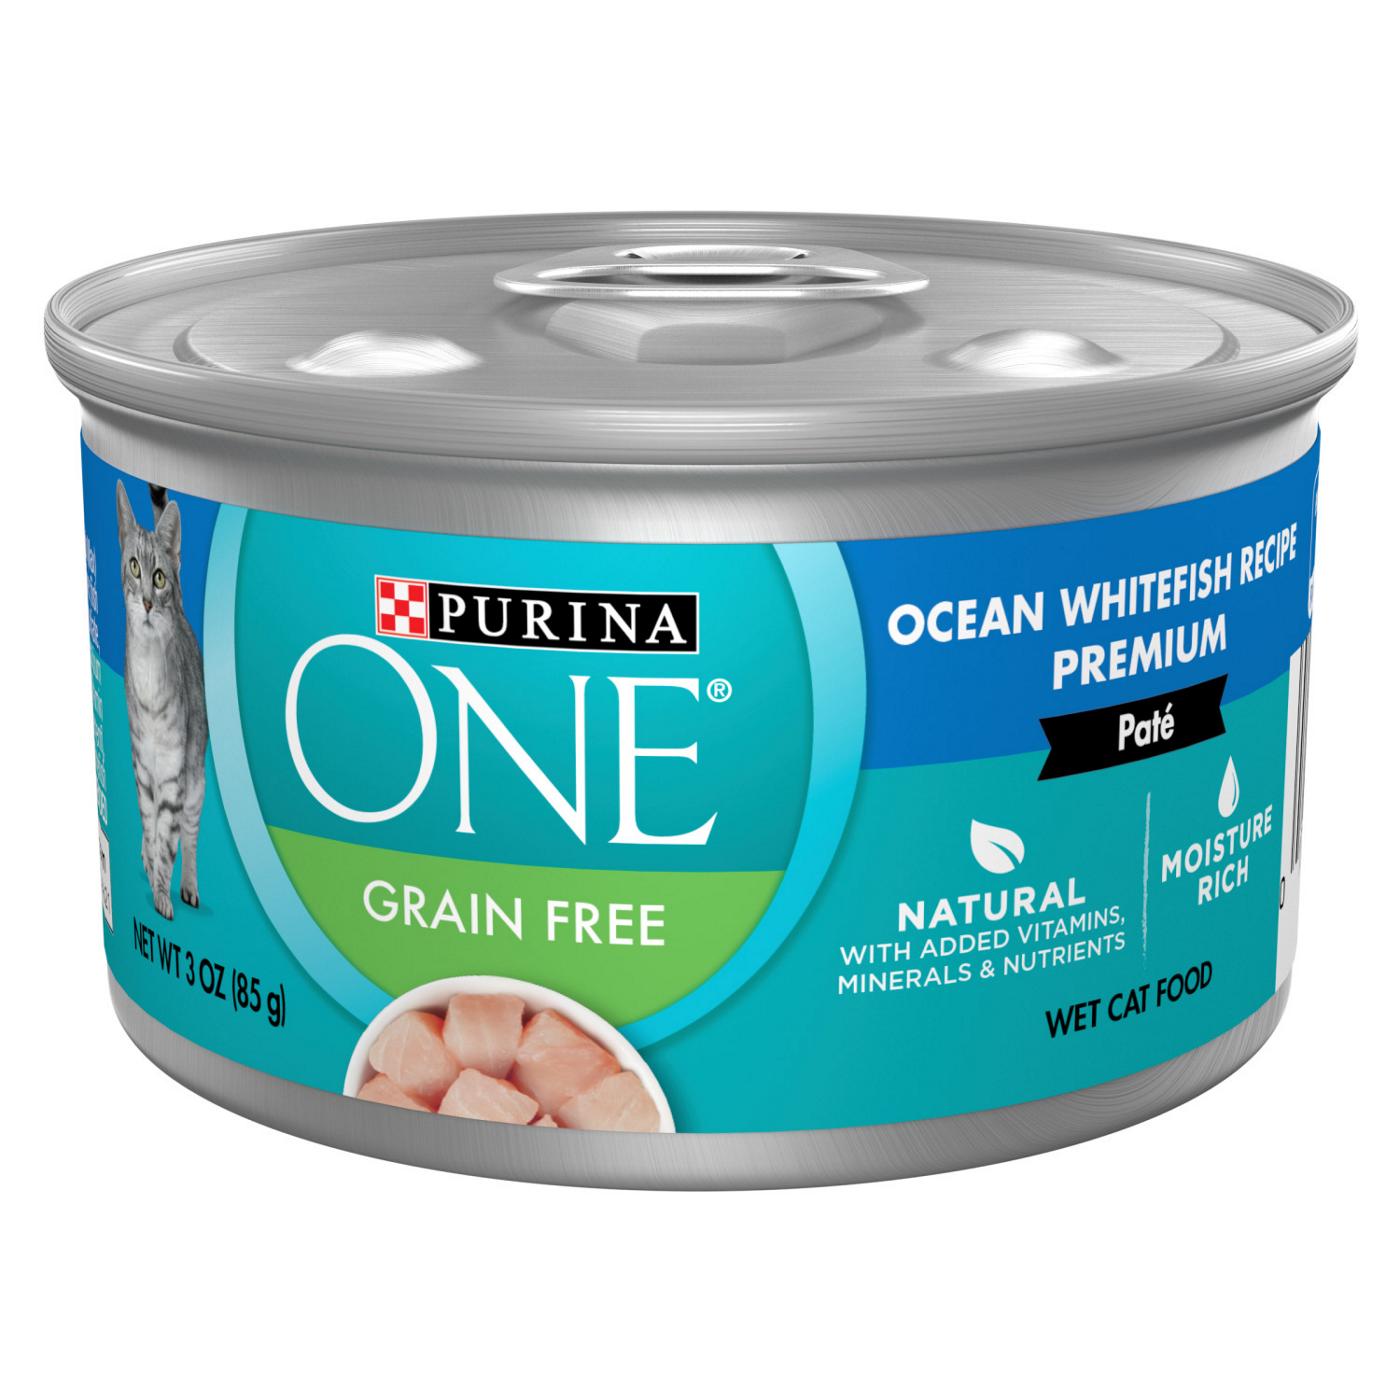 Purina ONE Purina ONE Natural, High Protein, Grain Free Wet Cat Food Pate, Ocean Whitefish Recipe; image 1 of 6